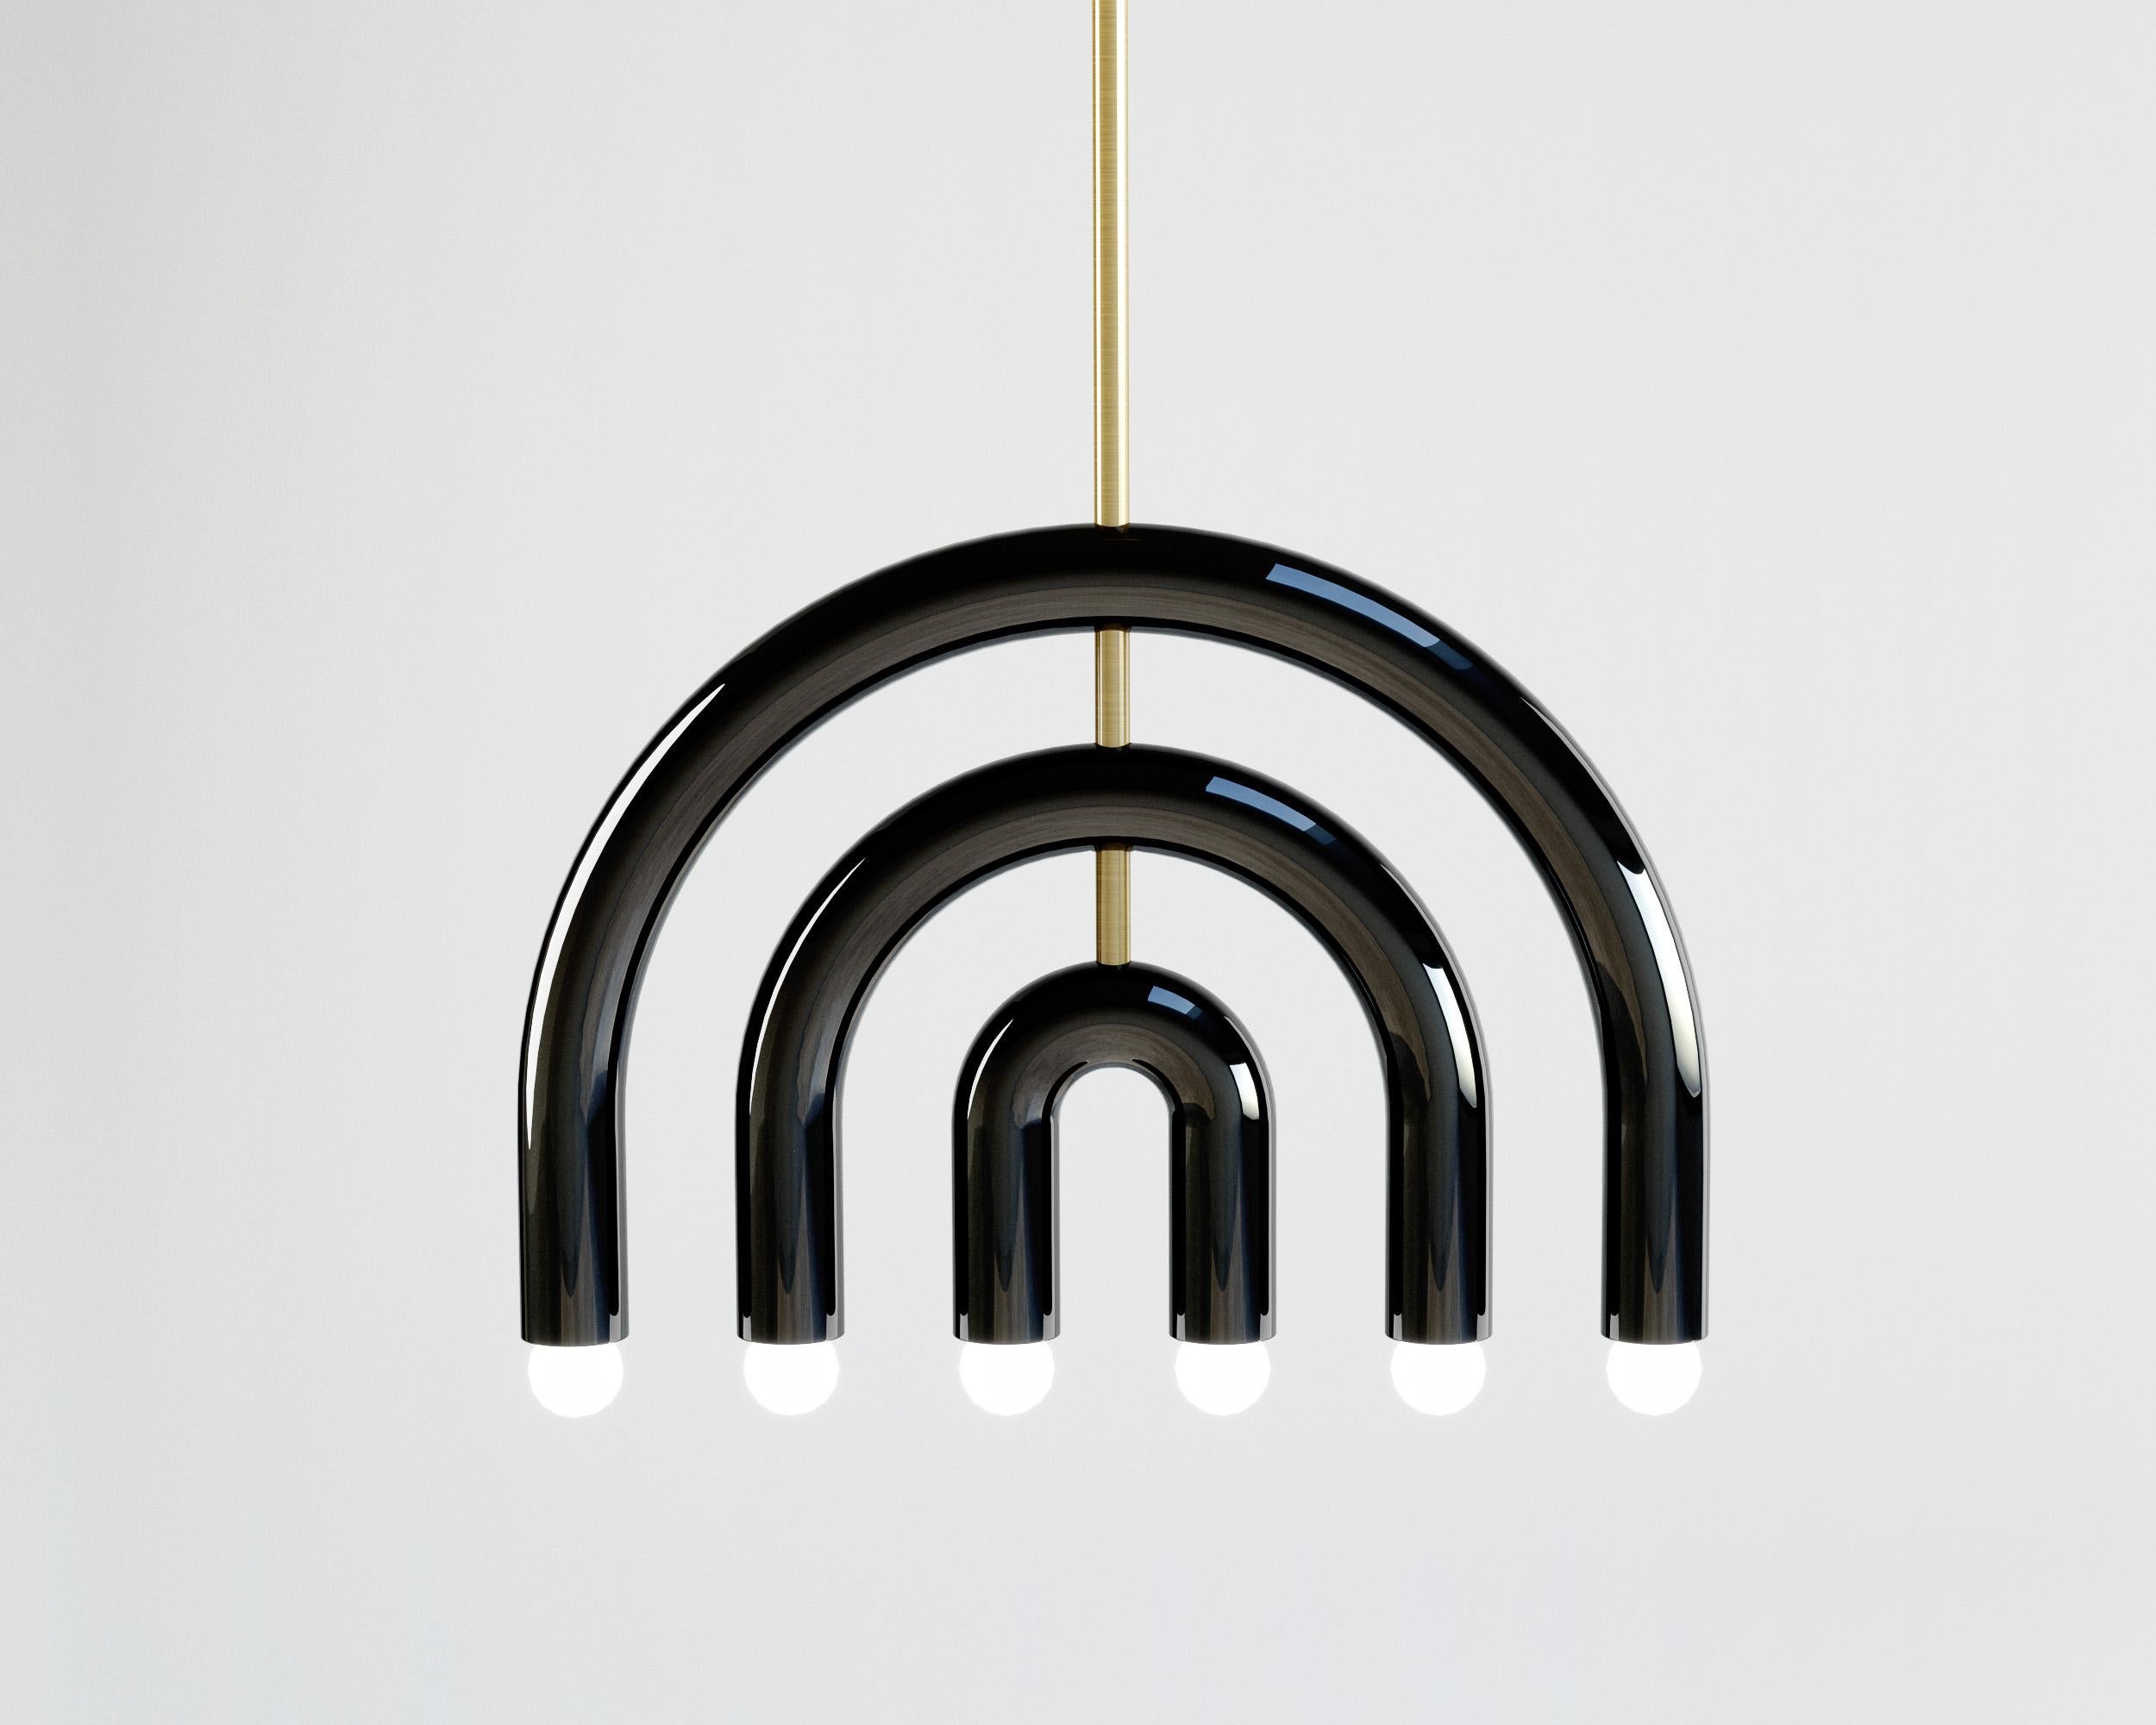 TRN F1 Pendant lamp / ceiling lamp / chandelier
Designer: Pani Jurek

Dimensions: H 375 x 55 x 5 cm
Model shown: Black 

Bulb (not included): E27/E26, compatible with US electric system

Materials: Hand glazed ceramic and brass
Rod: brass, length